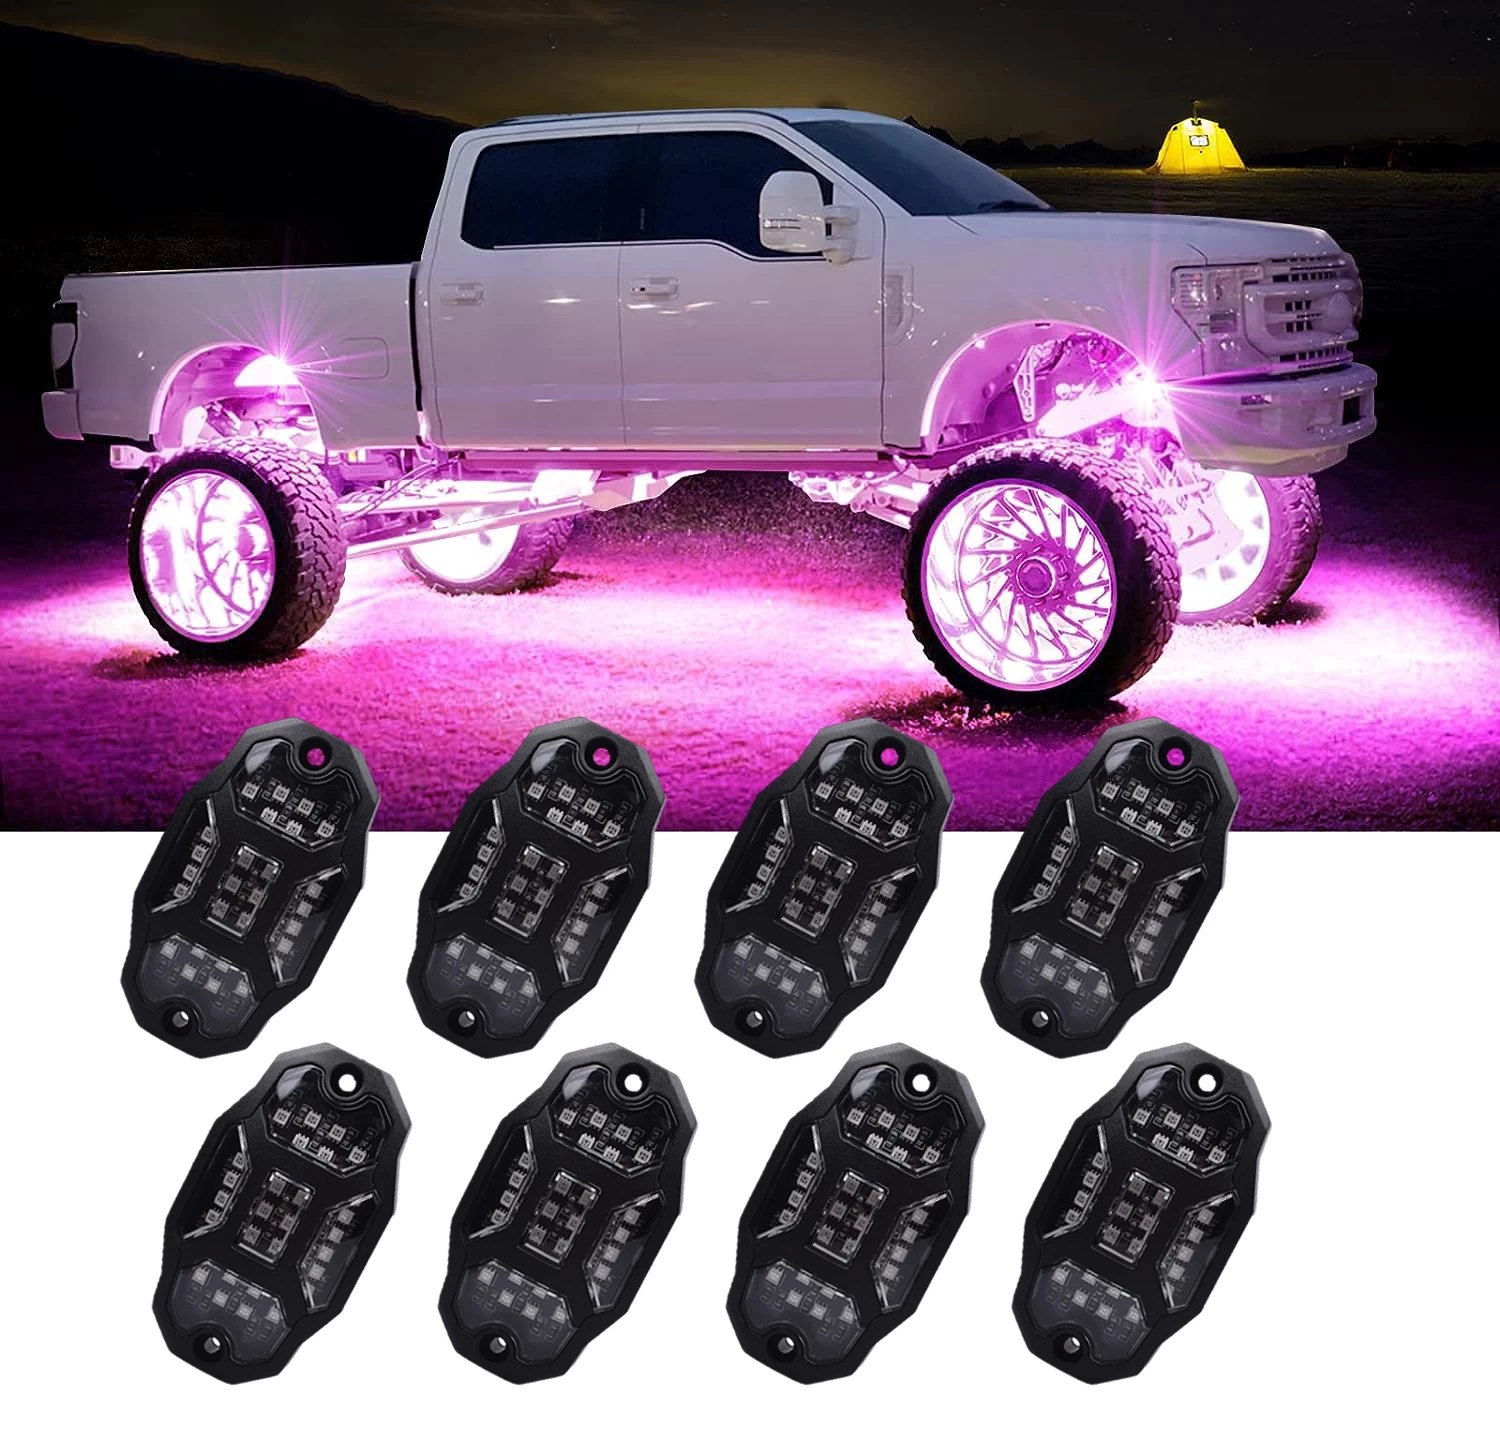 porcelana Undergolw Light For Car Jeep Off-Road Truck Boat Bluetooth APP Control 4/6/8 In 1 RGB LED Rock Lights Chassis Light Music Sync - COPY - bav4w2 fabricante